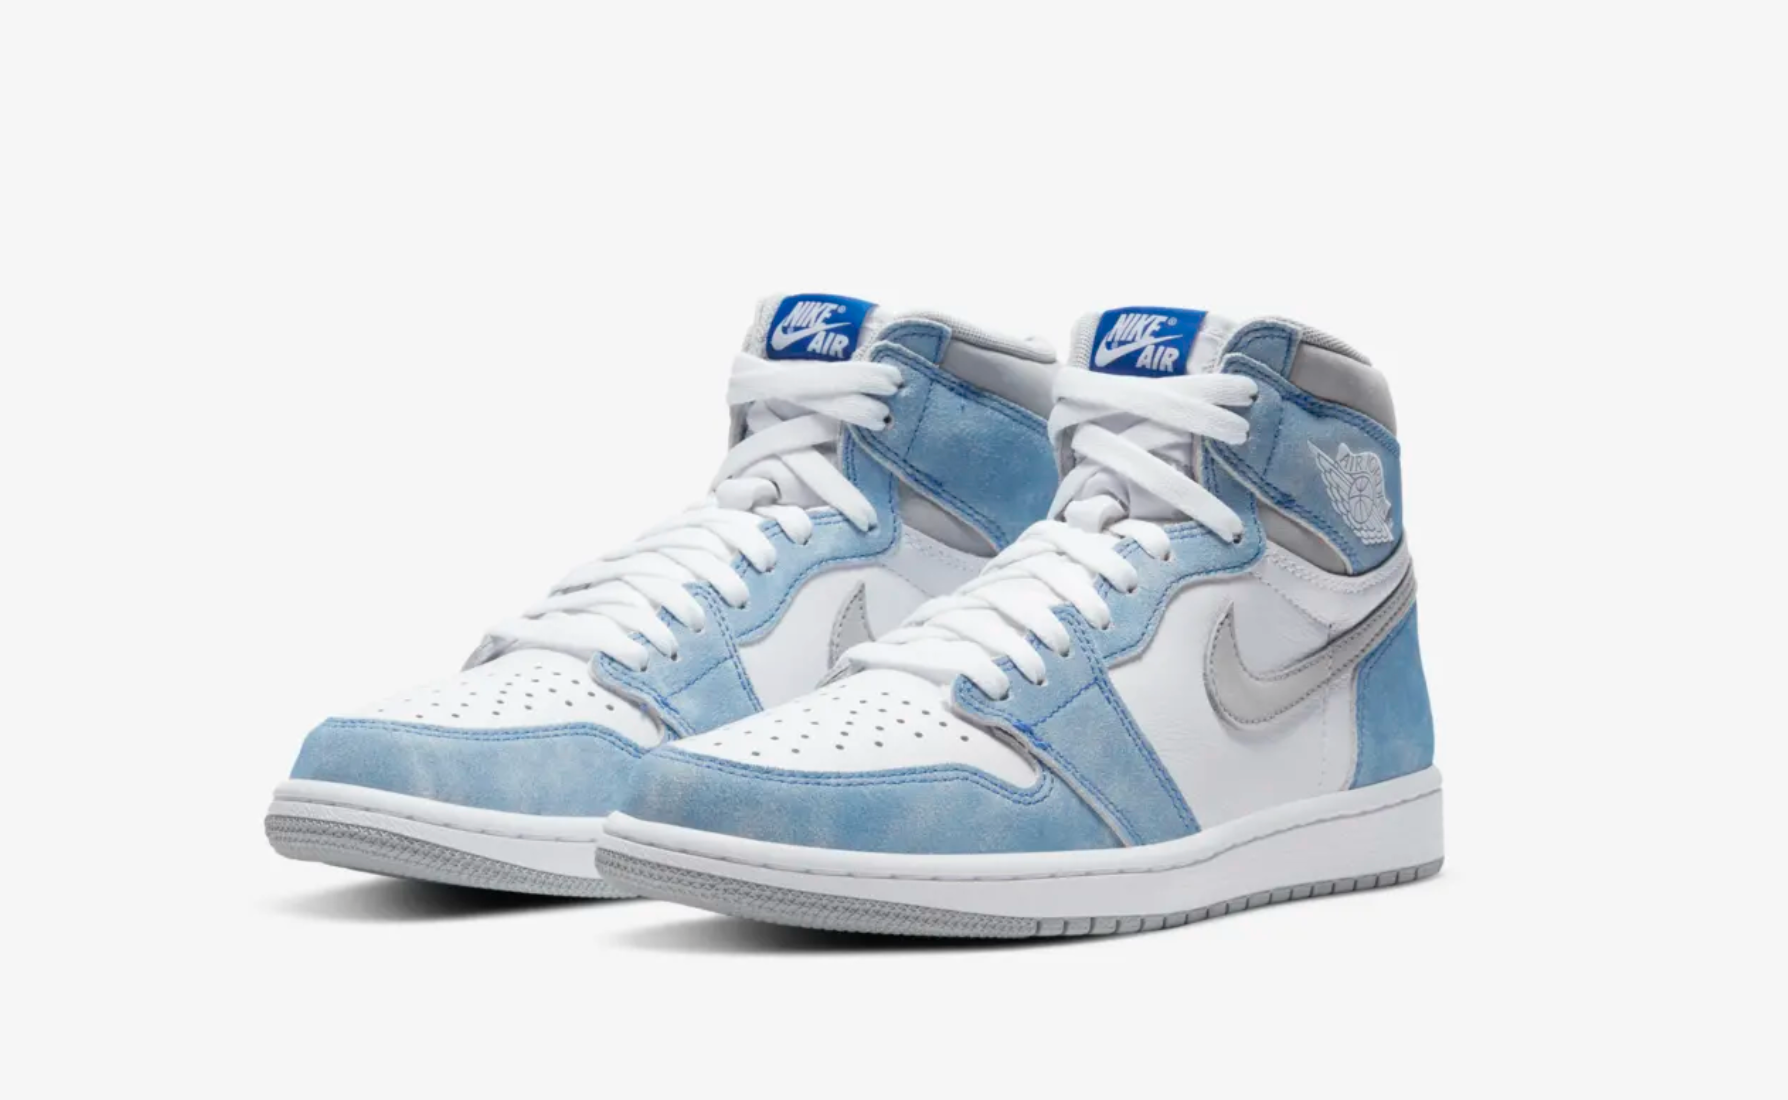 Defund The SNKRS App: Sneakerheads Livid Following The “Release” of The Air Jordan 1 ‘Hyper Royal’